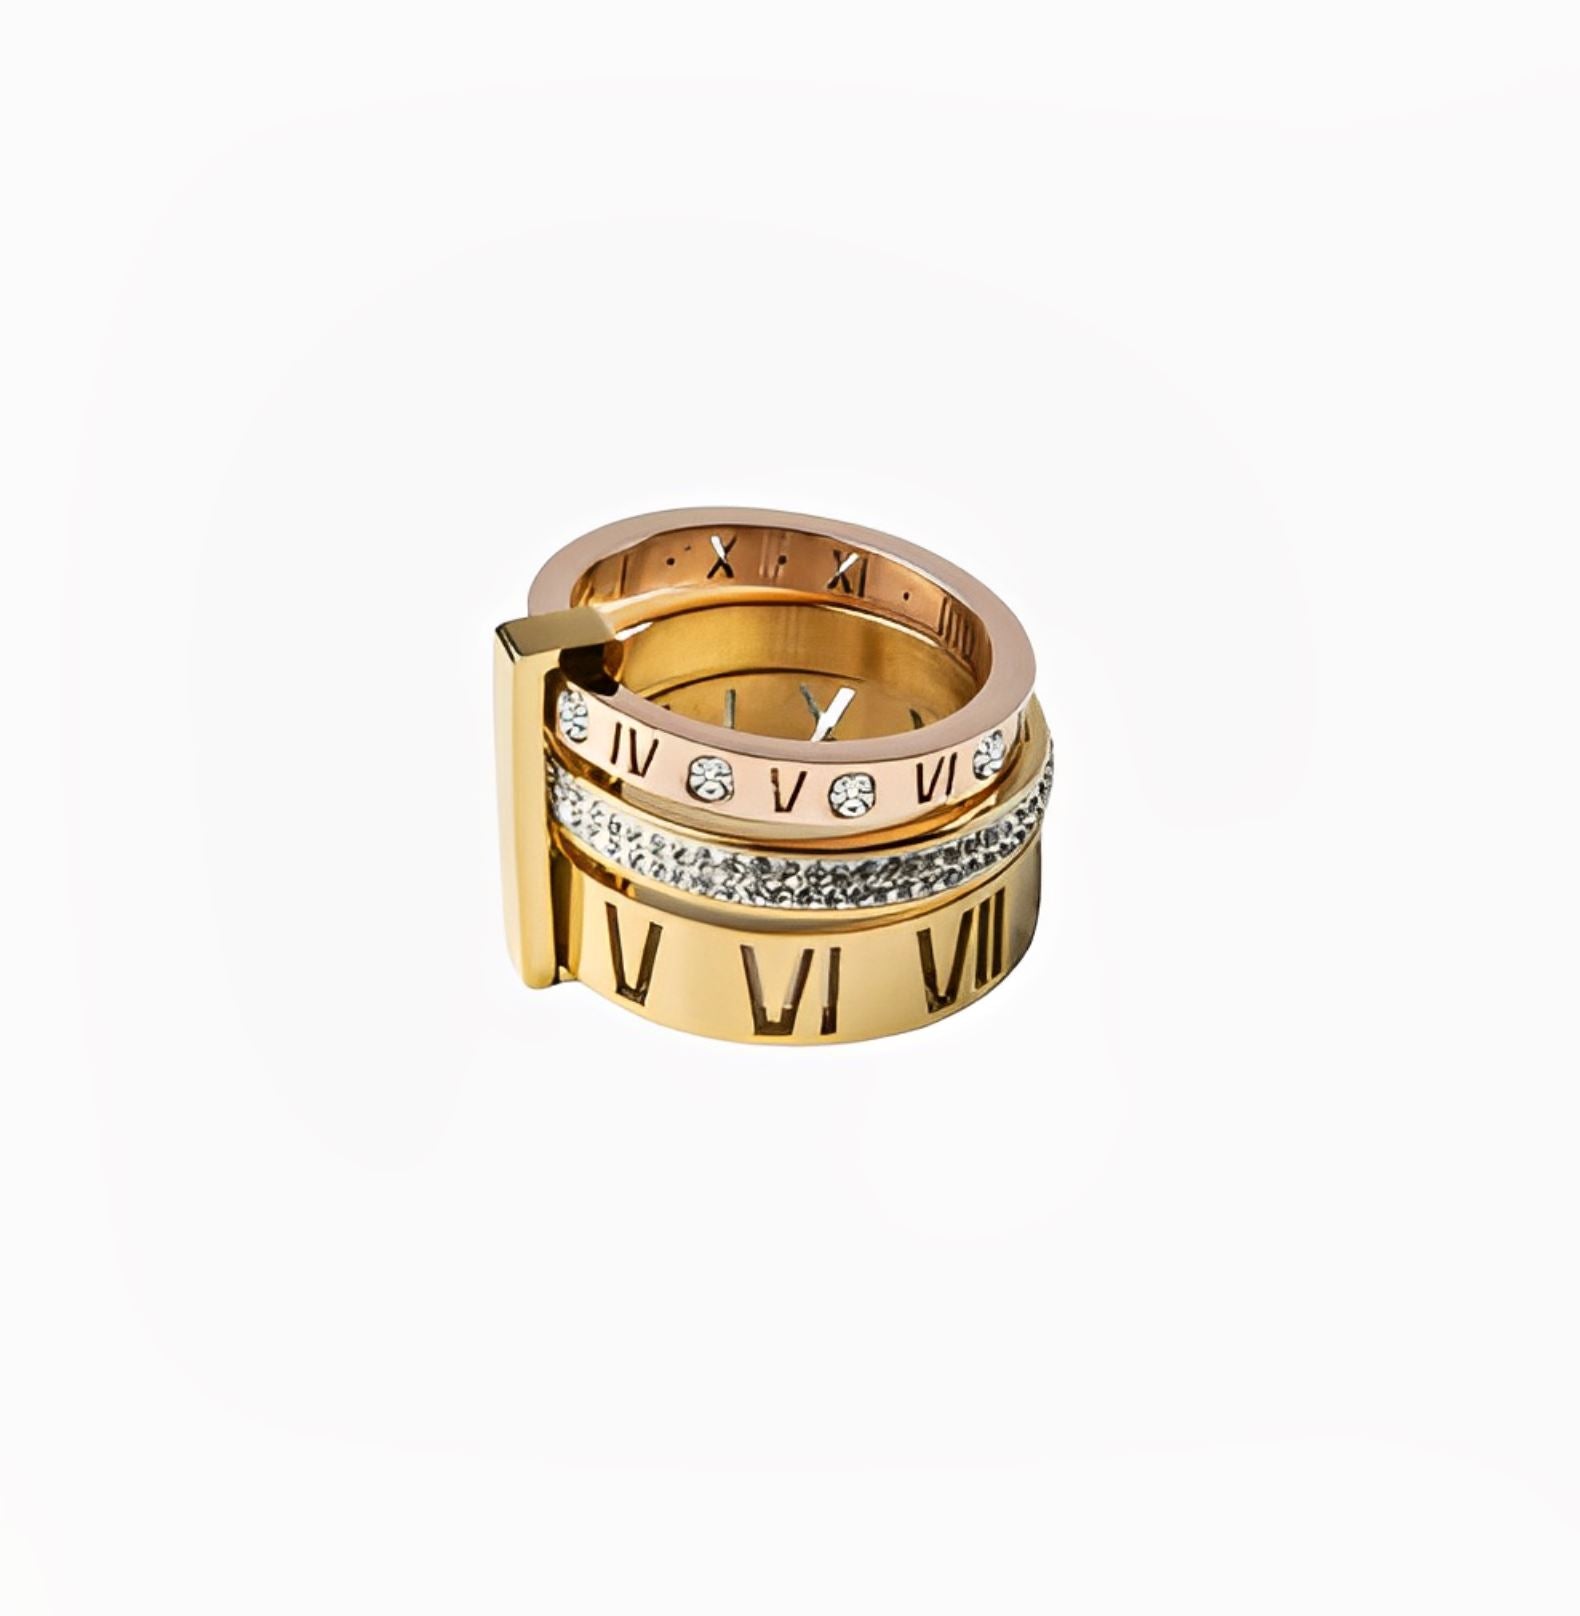 TRIPLE STACK STONE RING - GOLD braclet Yubama Jewelry Online Store - The Elegant Designs of Gold and Silver ! 